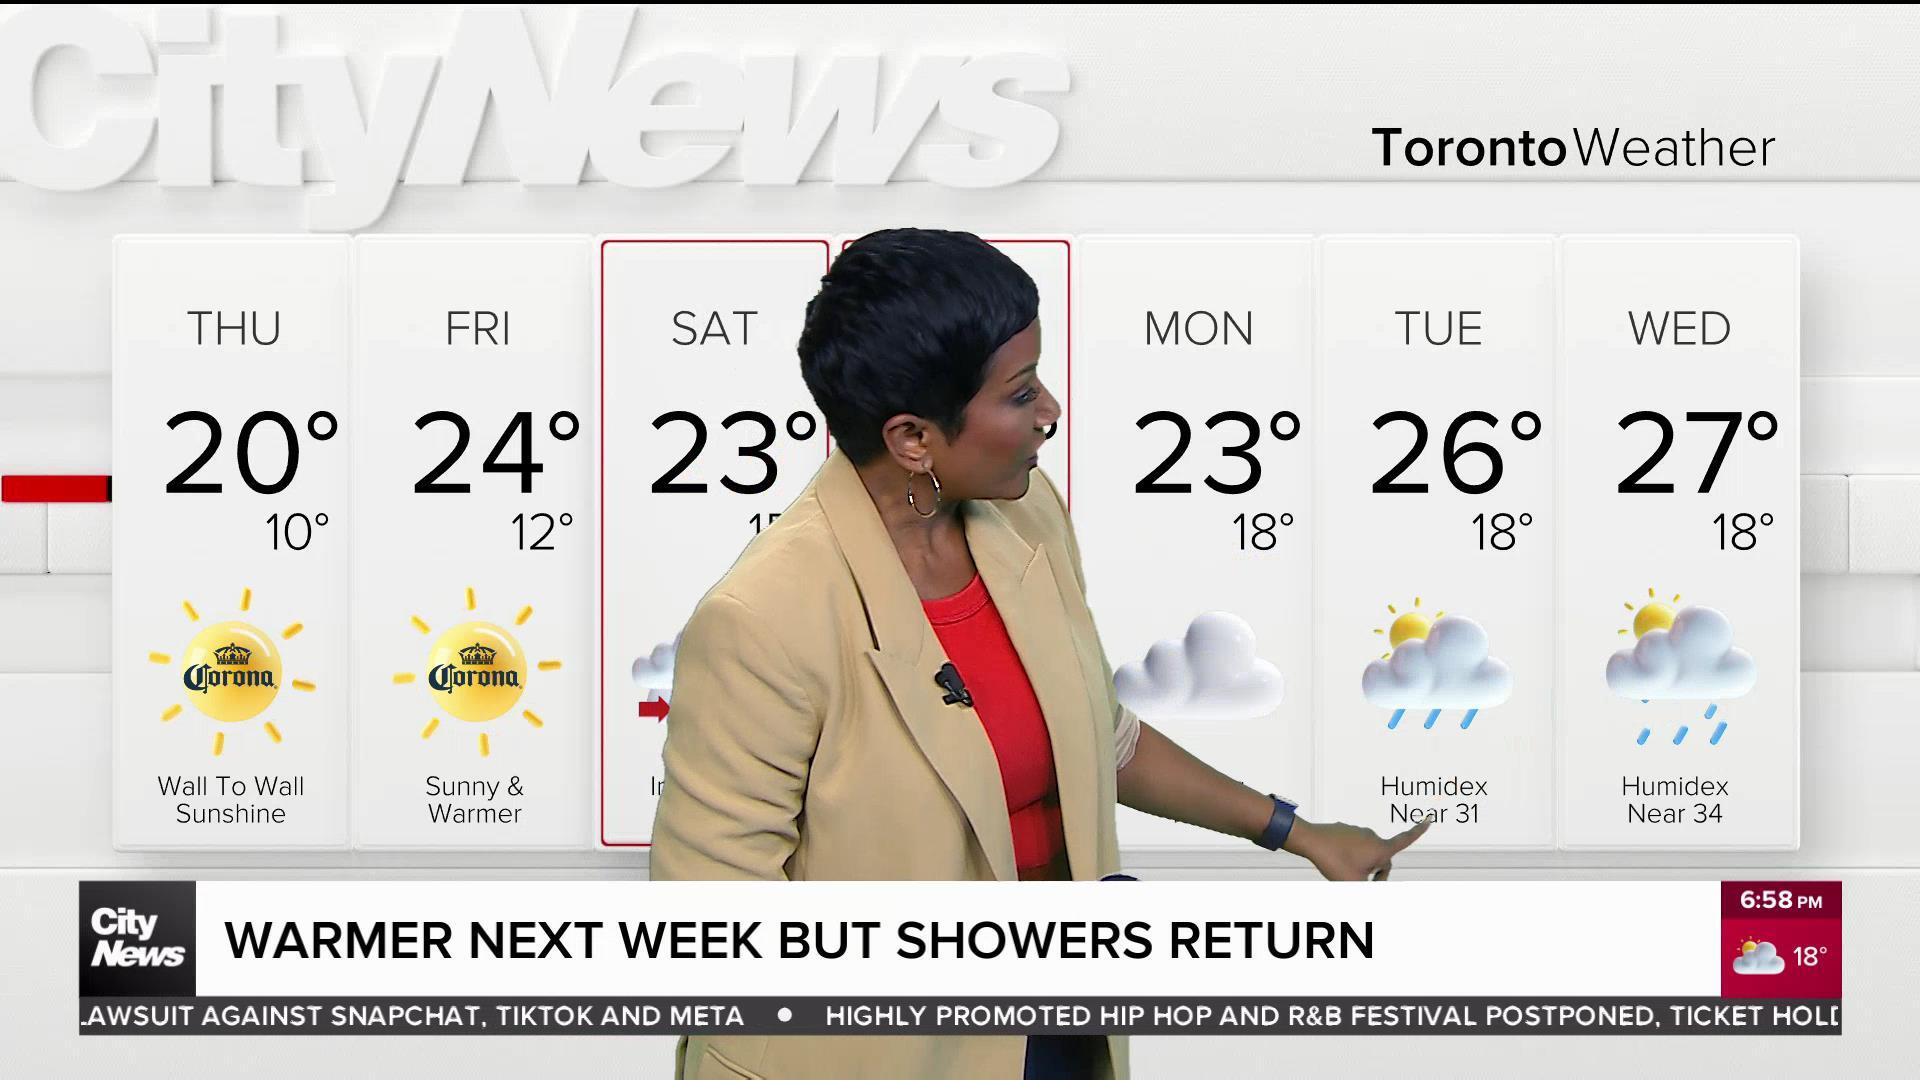 Showers expected to return next week